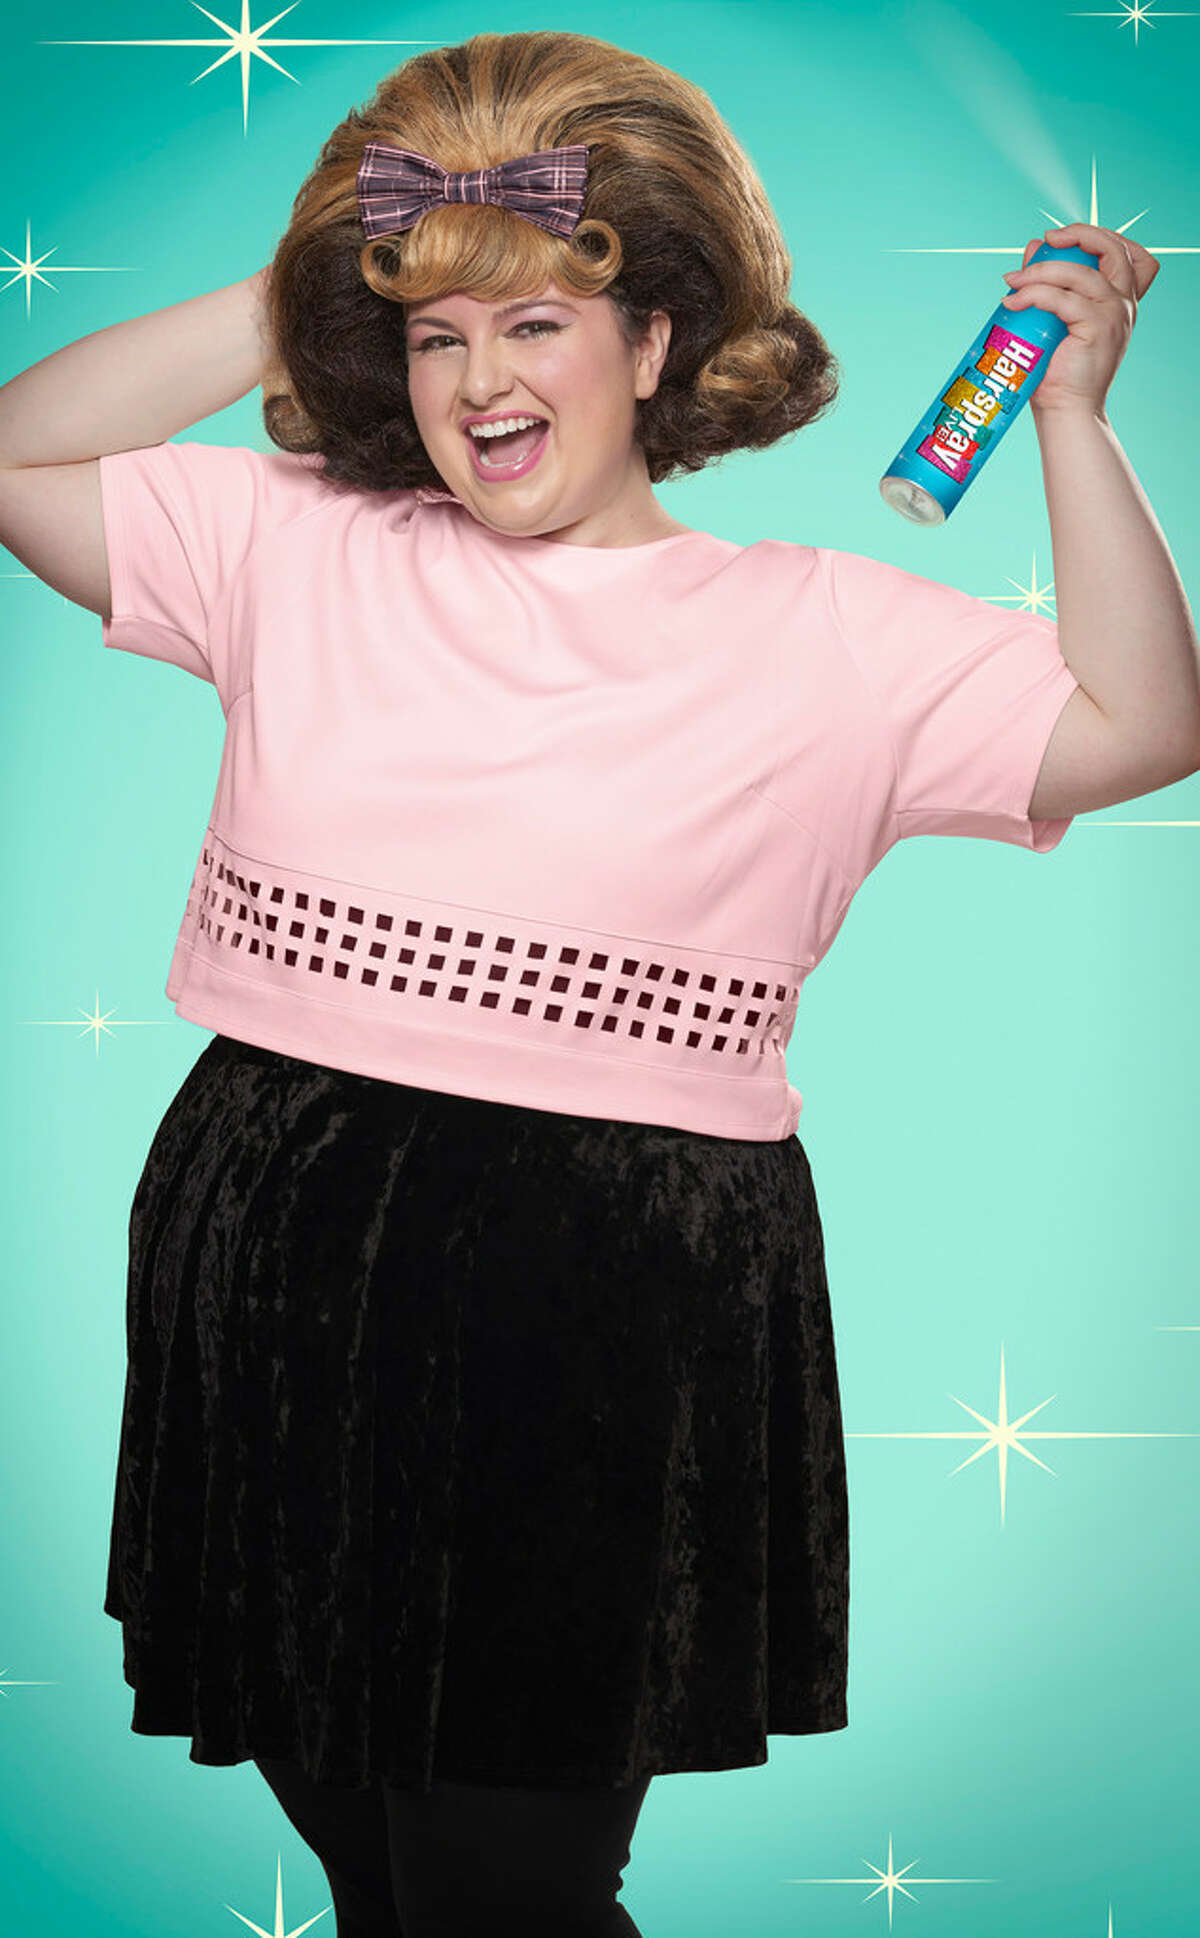 League City's Maddie Baillio stars as Tracy Turnblad in the star-studded "Hairspray Live!"